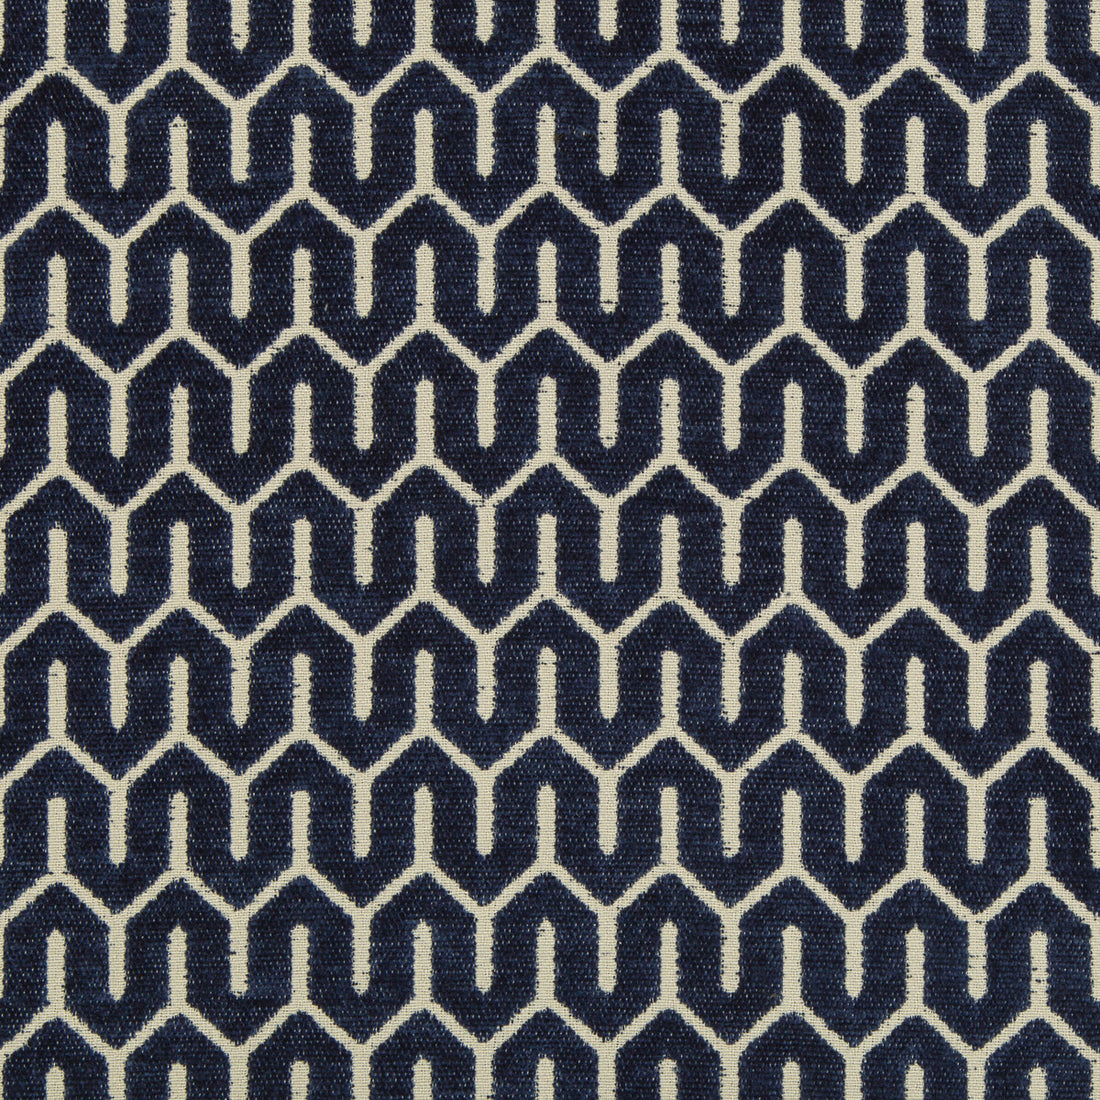 Kravet Design fabric in 35706-5 color - pattern 35706.5.0 - by Kravet Design in the Woven Colors collection